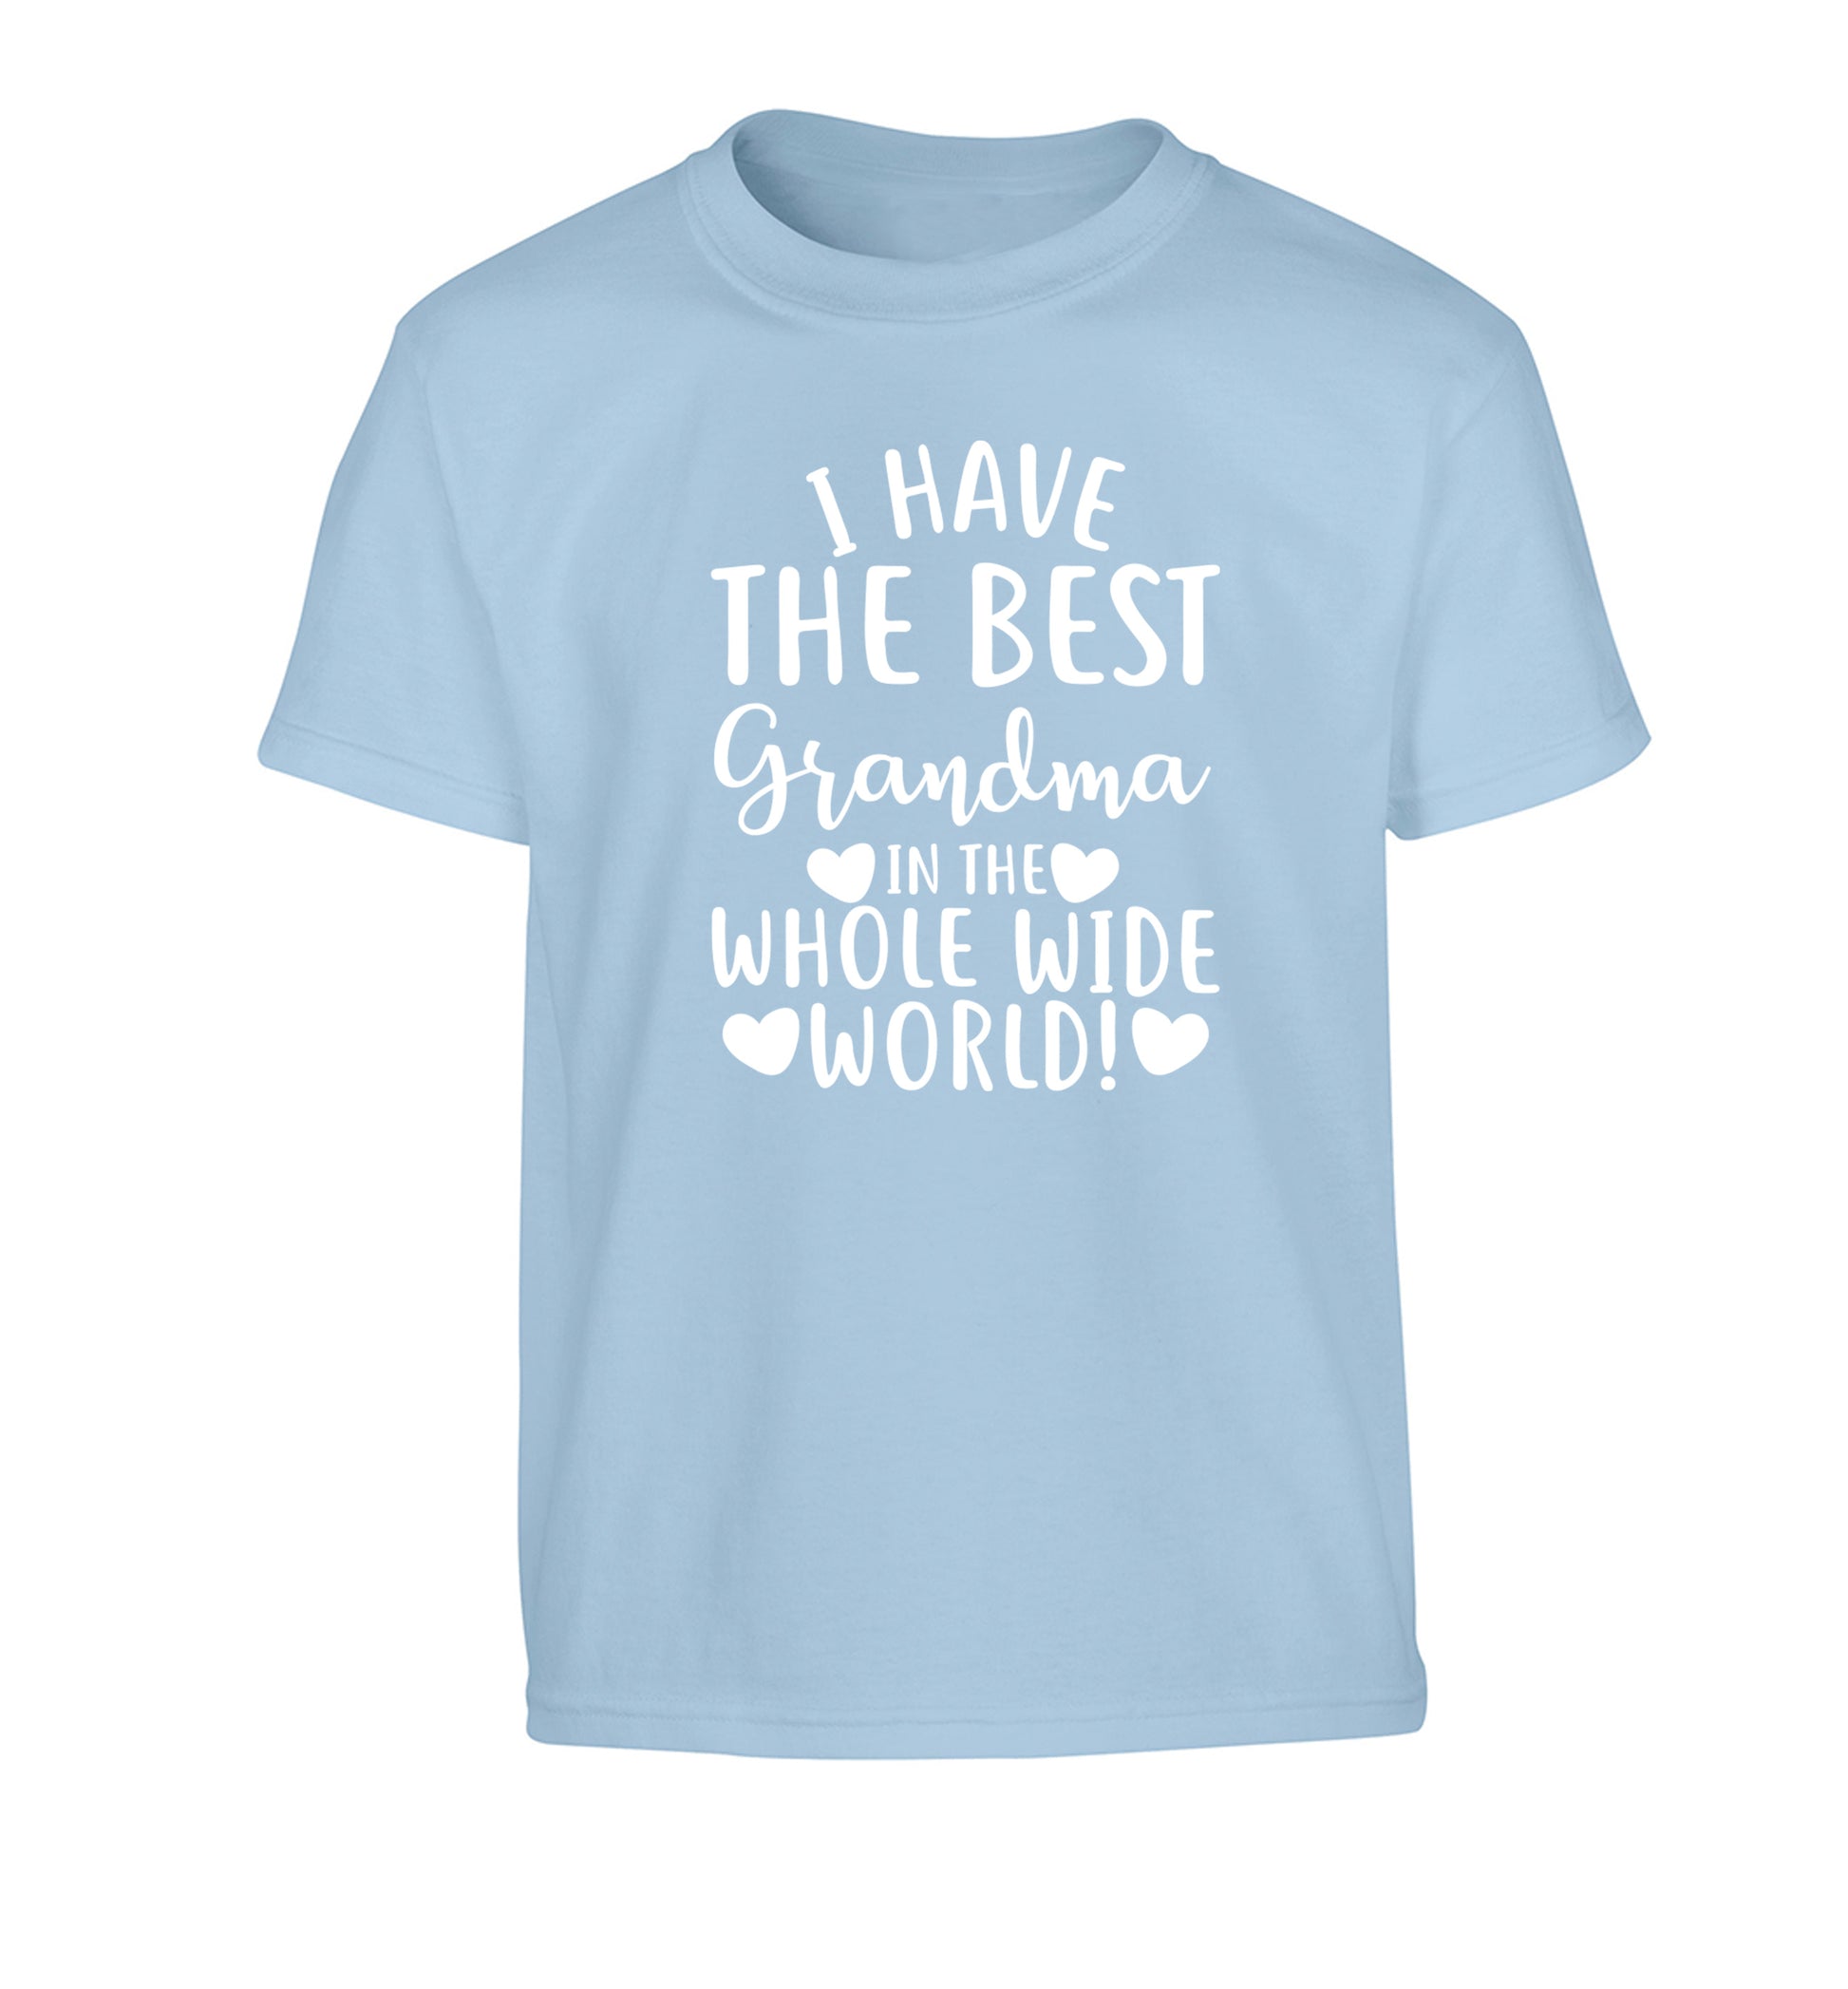 I have the best grandma in the whole wide world! Children's light blue Tshirt 12-13 Years